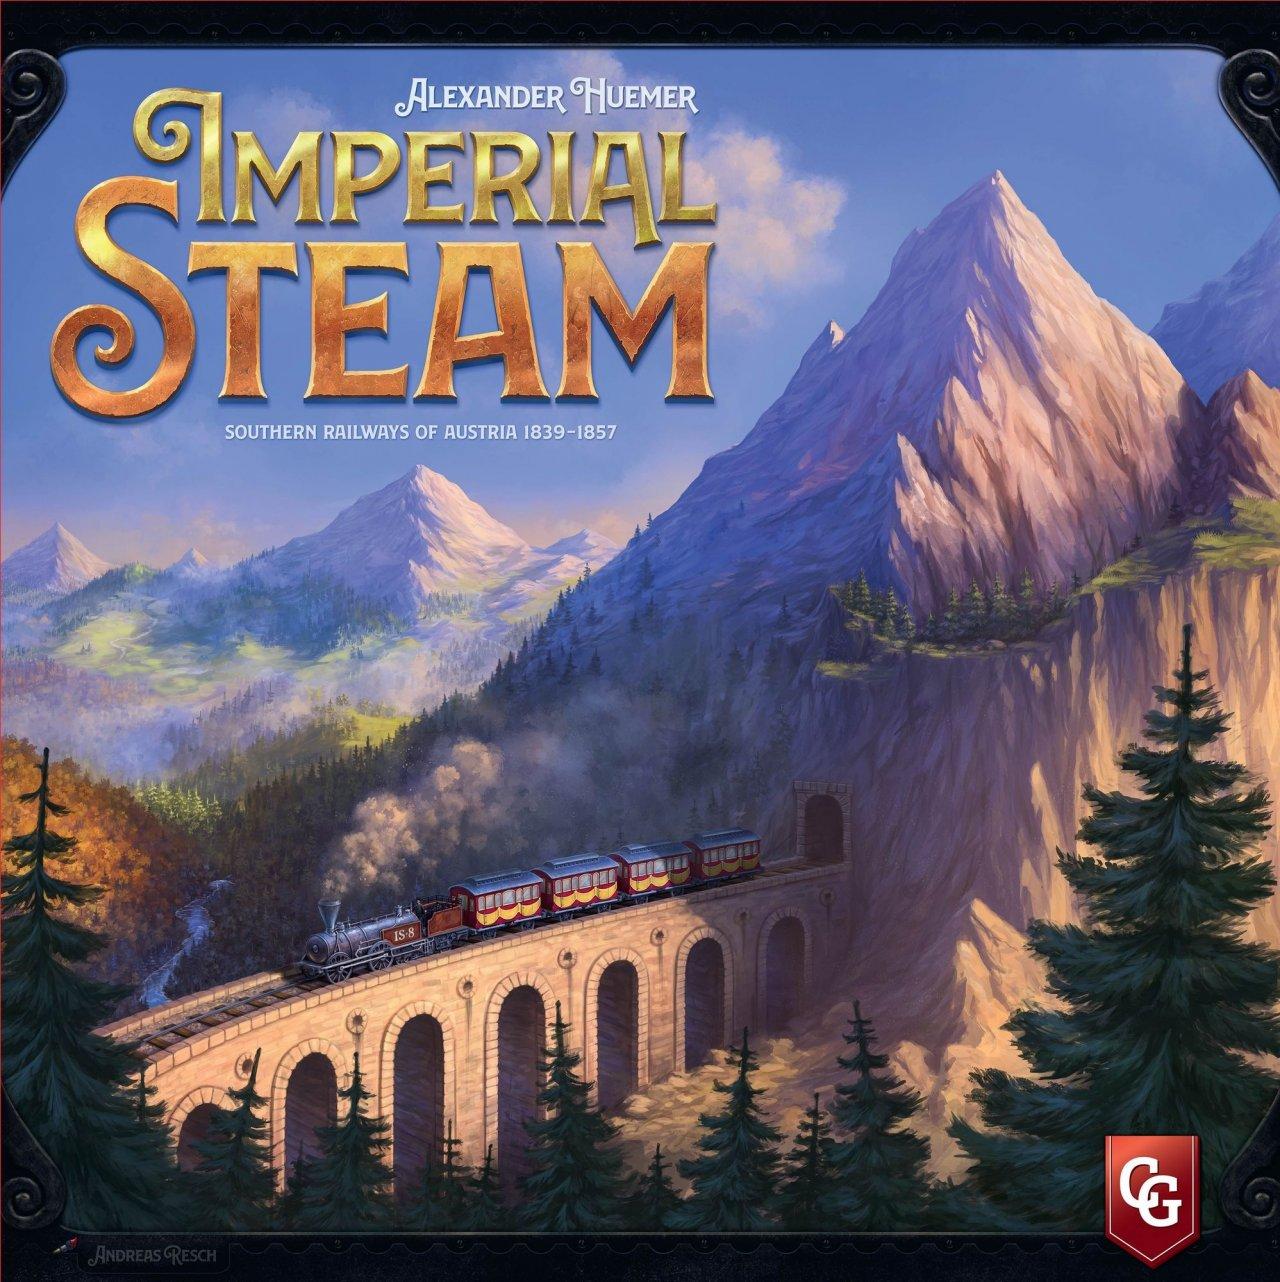 It's time for Imperial Steam Solo